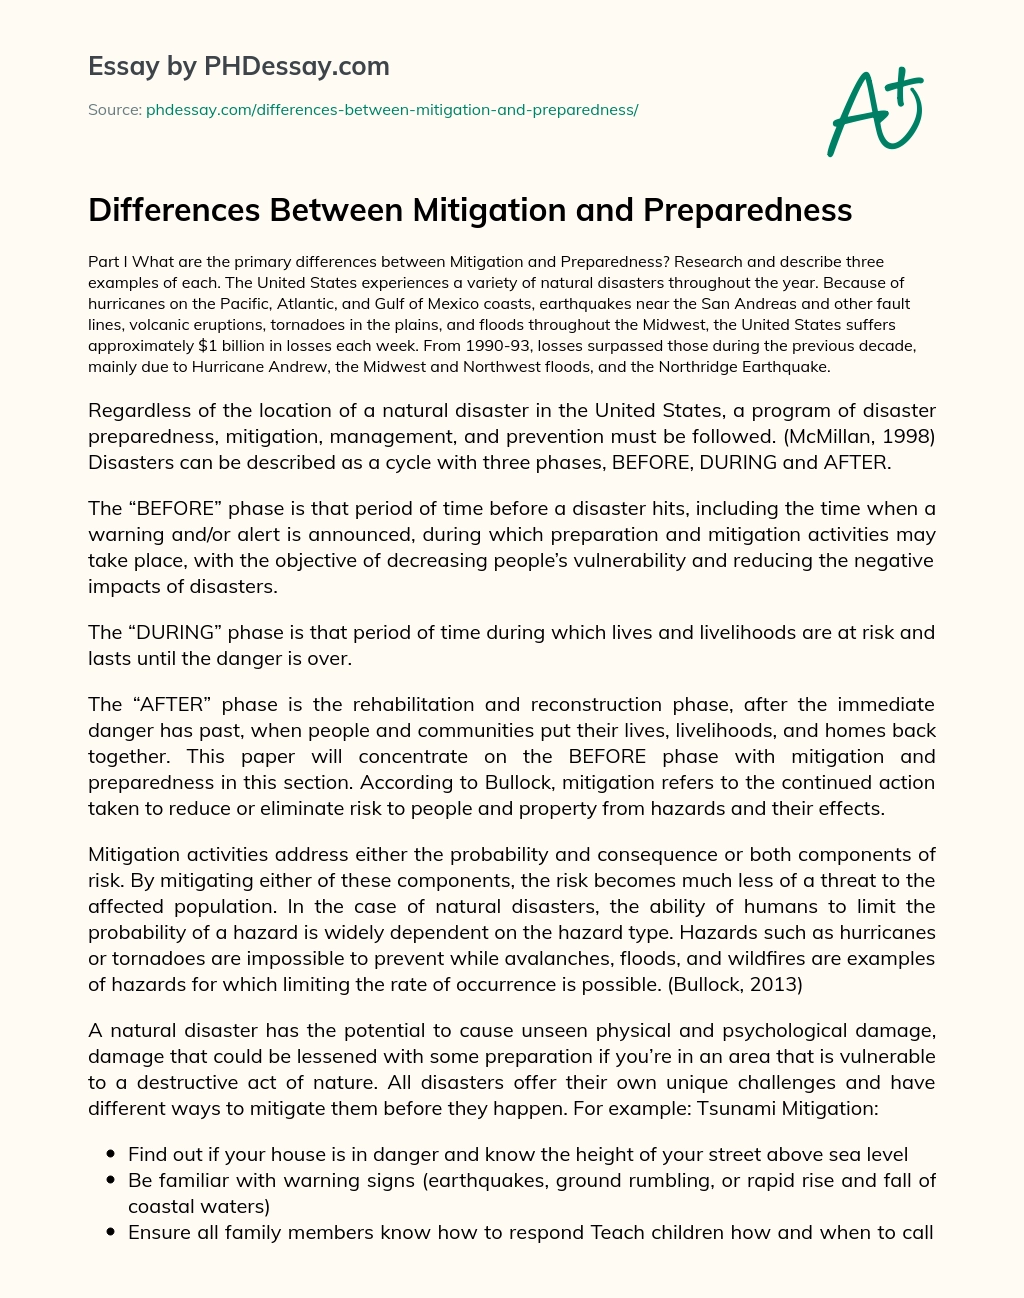 Differences Between Mitigation and Preparedness essay